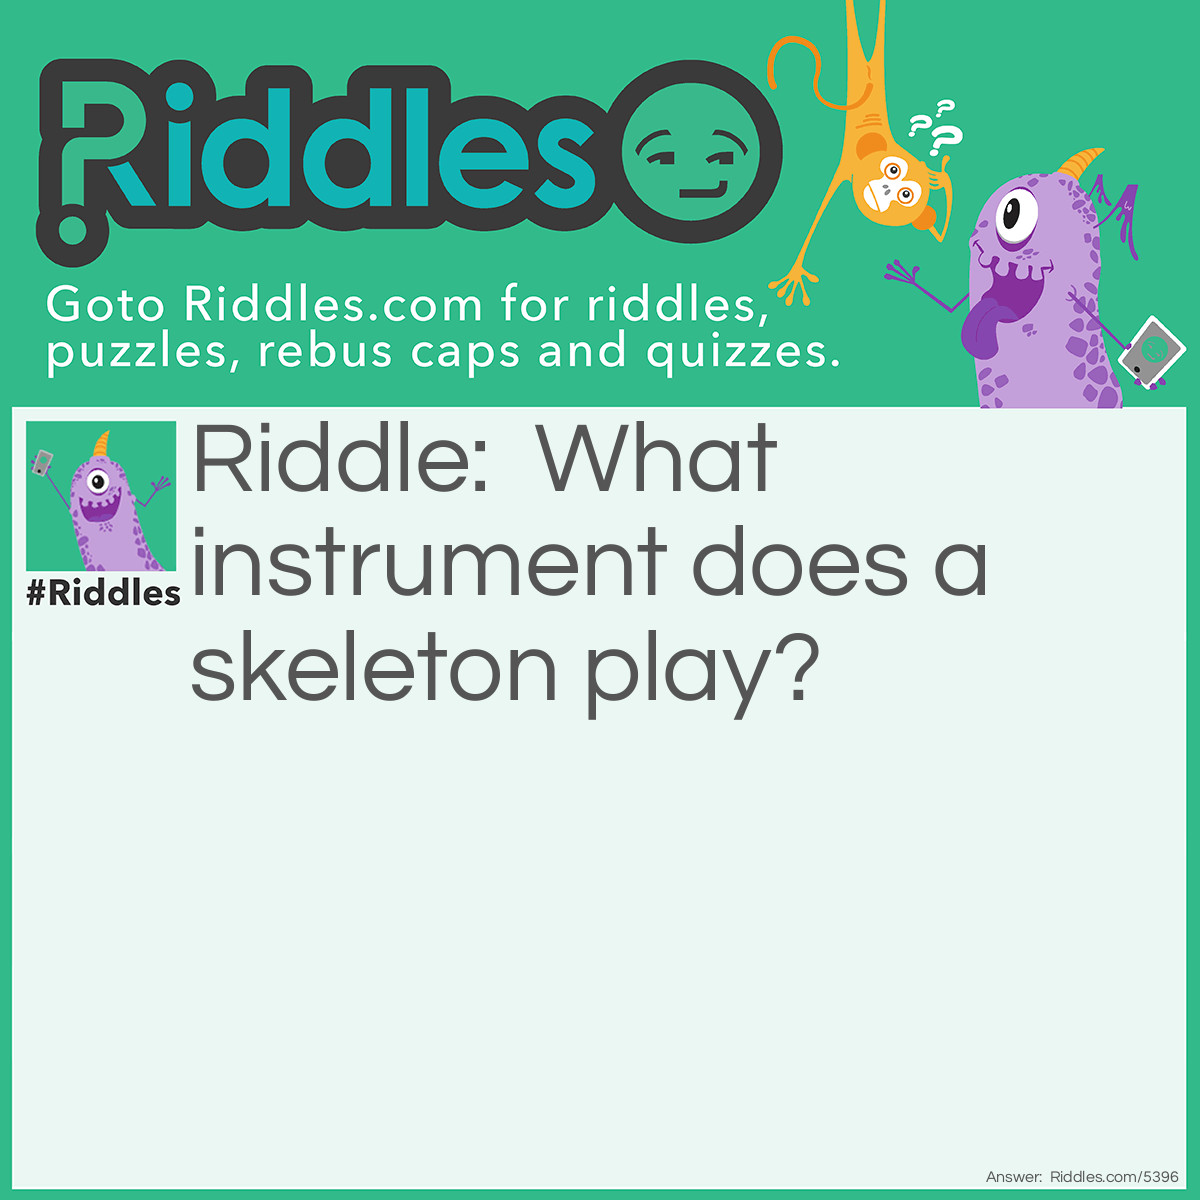 Riddle: What instrument does a skeleton play? Answer: Trombone.